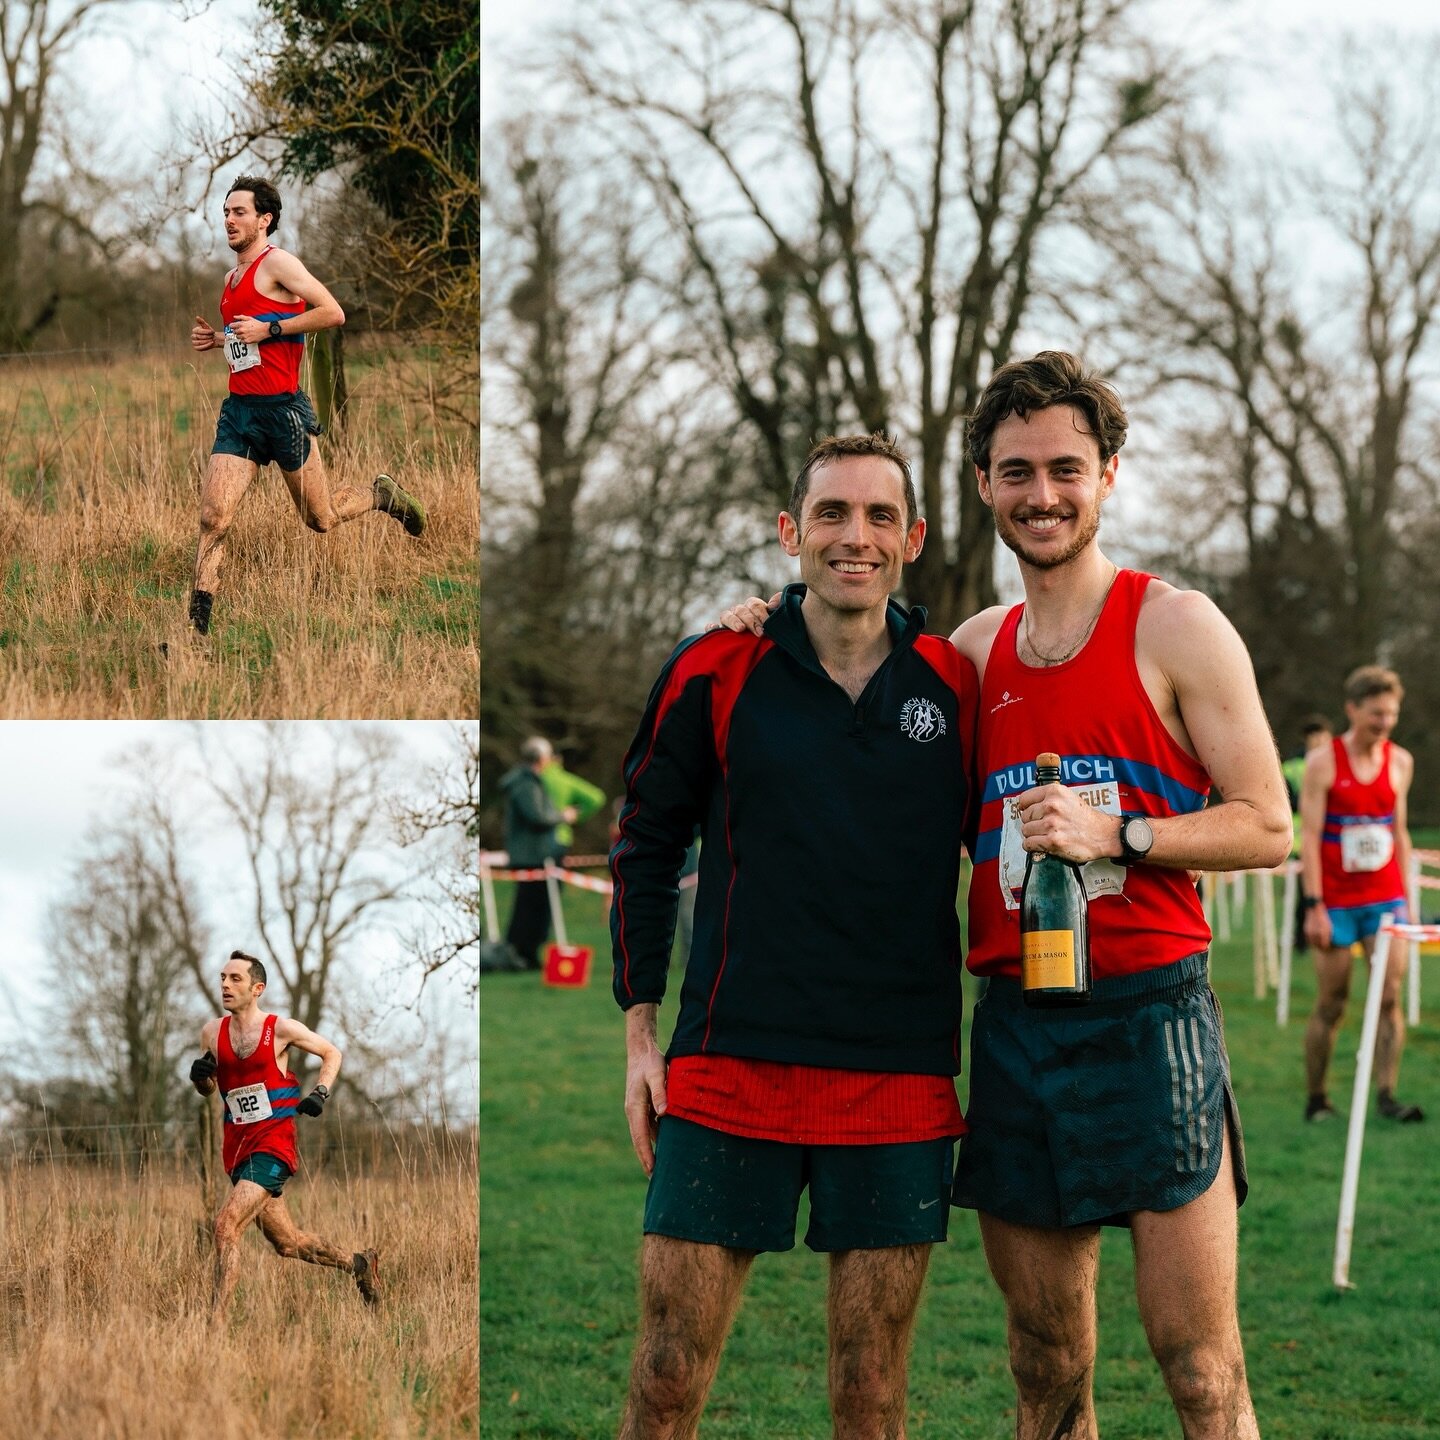 A Dulwich 1-2 at the top of the Tracksmith Surrey League Senior Men&rsquo;s Podium with Max Milarvie (2,3,2,2) and Captain Ed Chuck (10,4,12,4) picking up the bubbly 🍾 for an unerring season of quality from the arid earth of Richmond to the mud bath